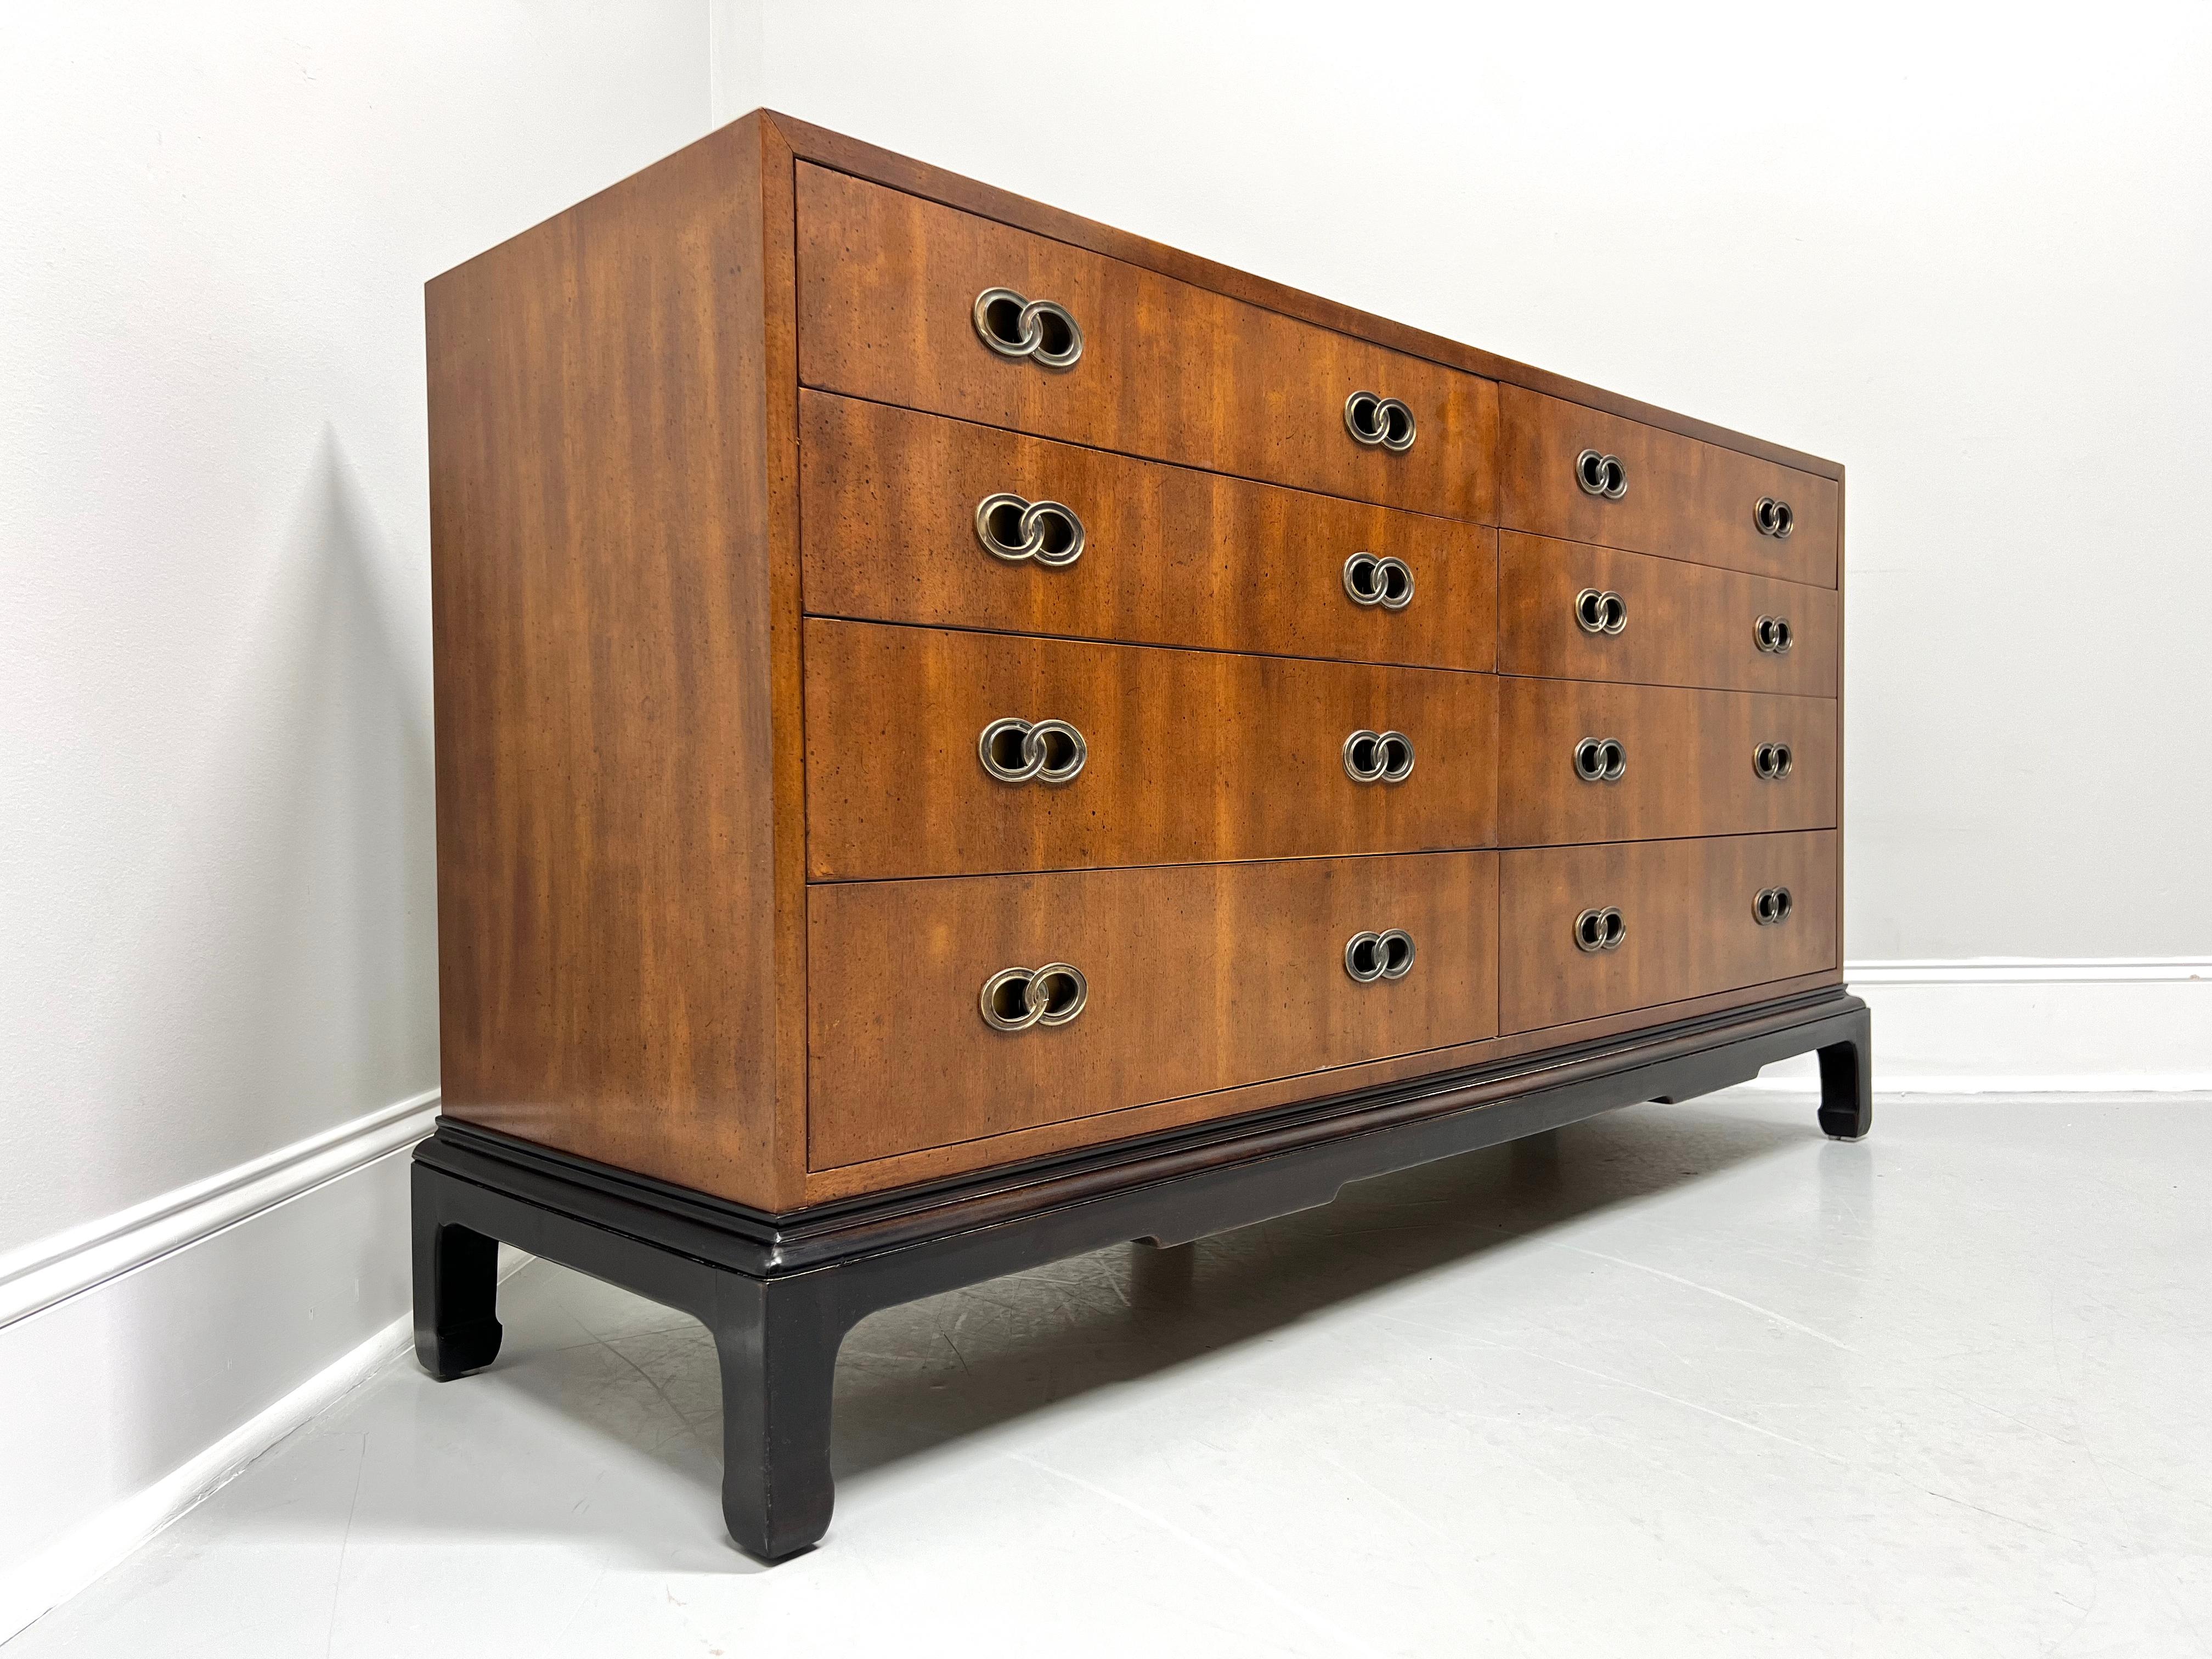 An Asian inspired double dresser designed by Michael Taylor for Henredon. Mahogany with a slightly distressed finish, decorative brass hardware, square edge to top, Ming design black lacquered base with curved inward square legs. Features eight